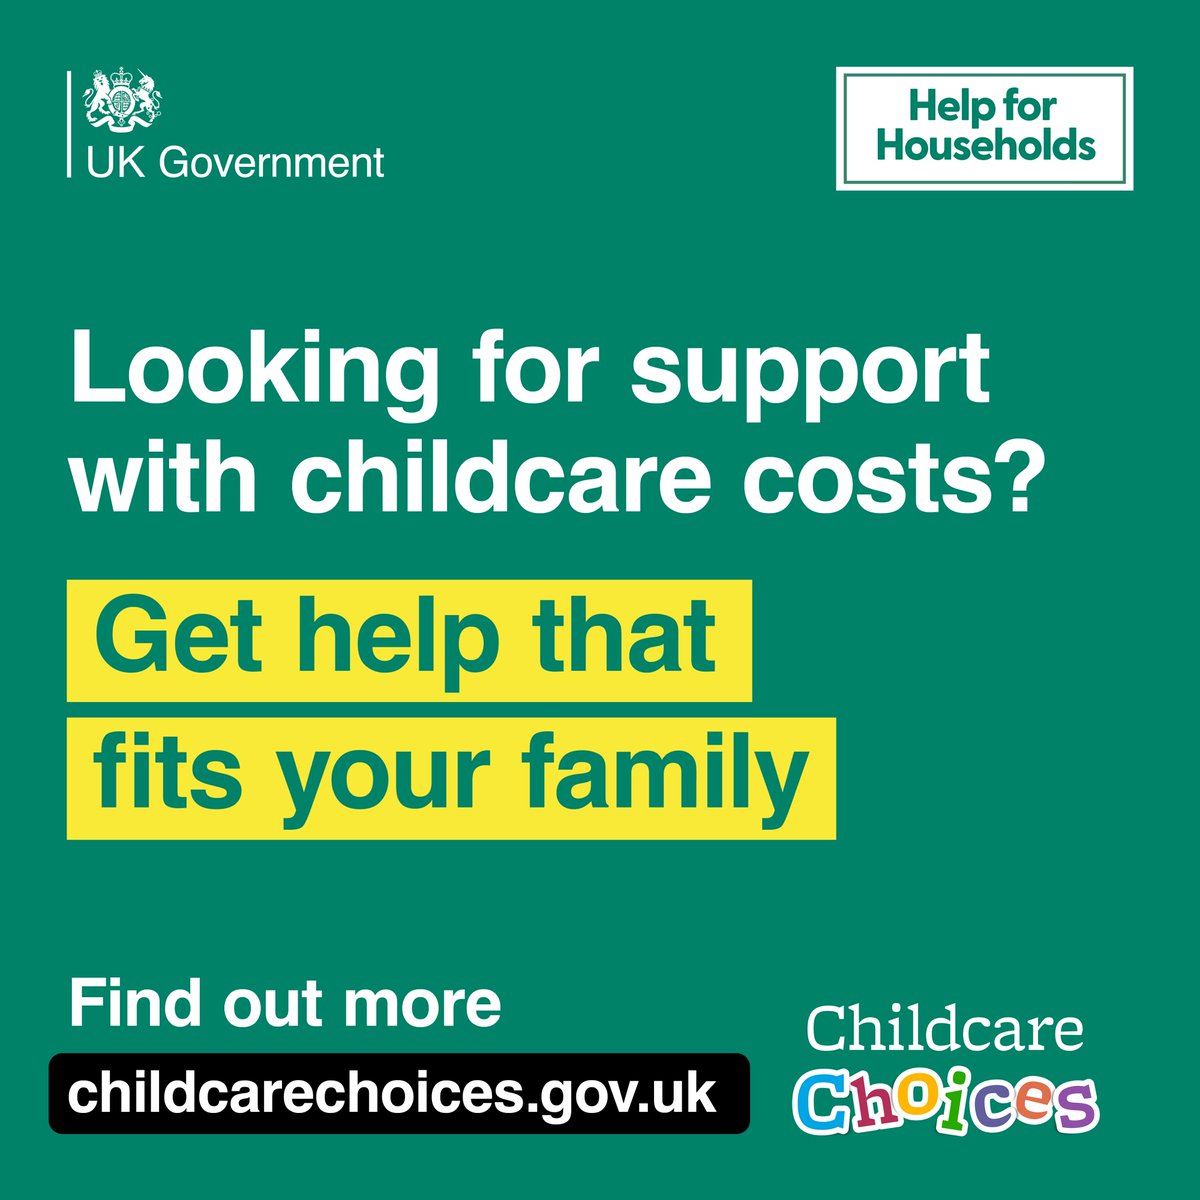 From September more childcare support is on the way. If you are an eligible working parent with a child who is or turns at least 9 months old, you can apply for 15 hours childcare from 12 May. Visit Childcare Choices for details: orlo.uk/Mz9D7